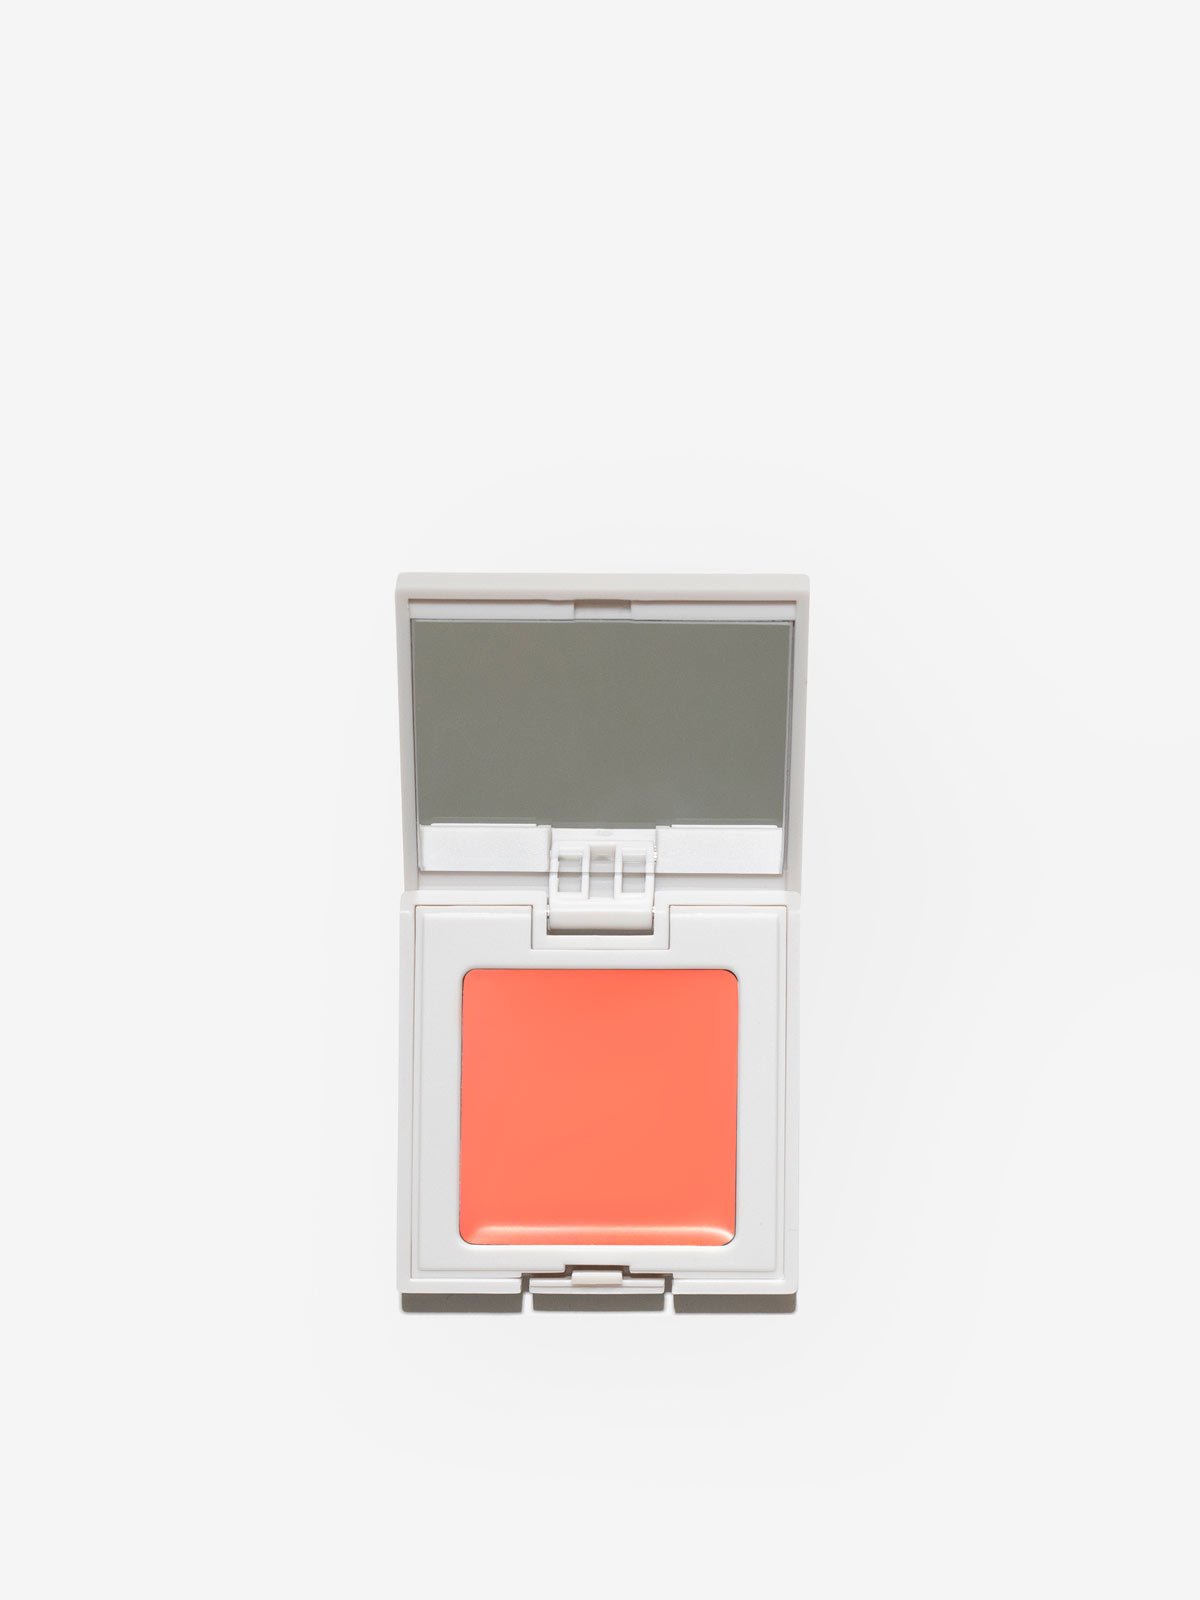 FRONT IMAGE OF REFY CREAM BLUSH IN SHADE PEACH